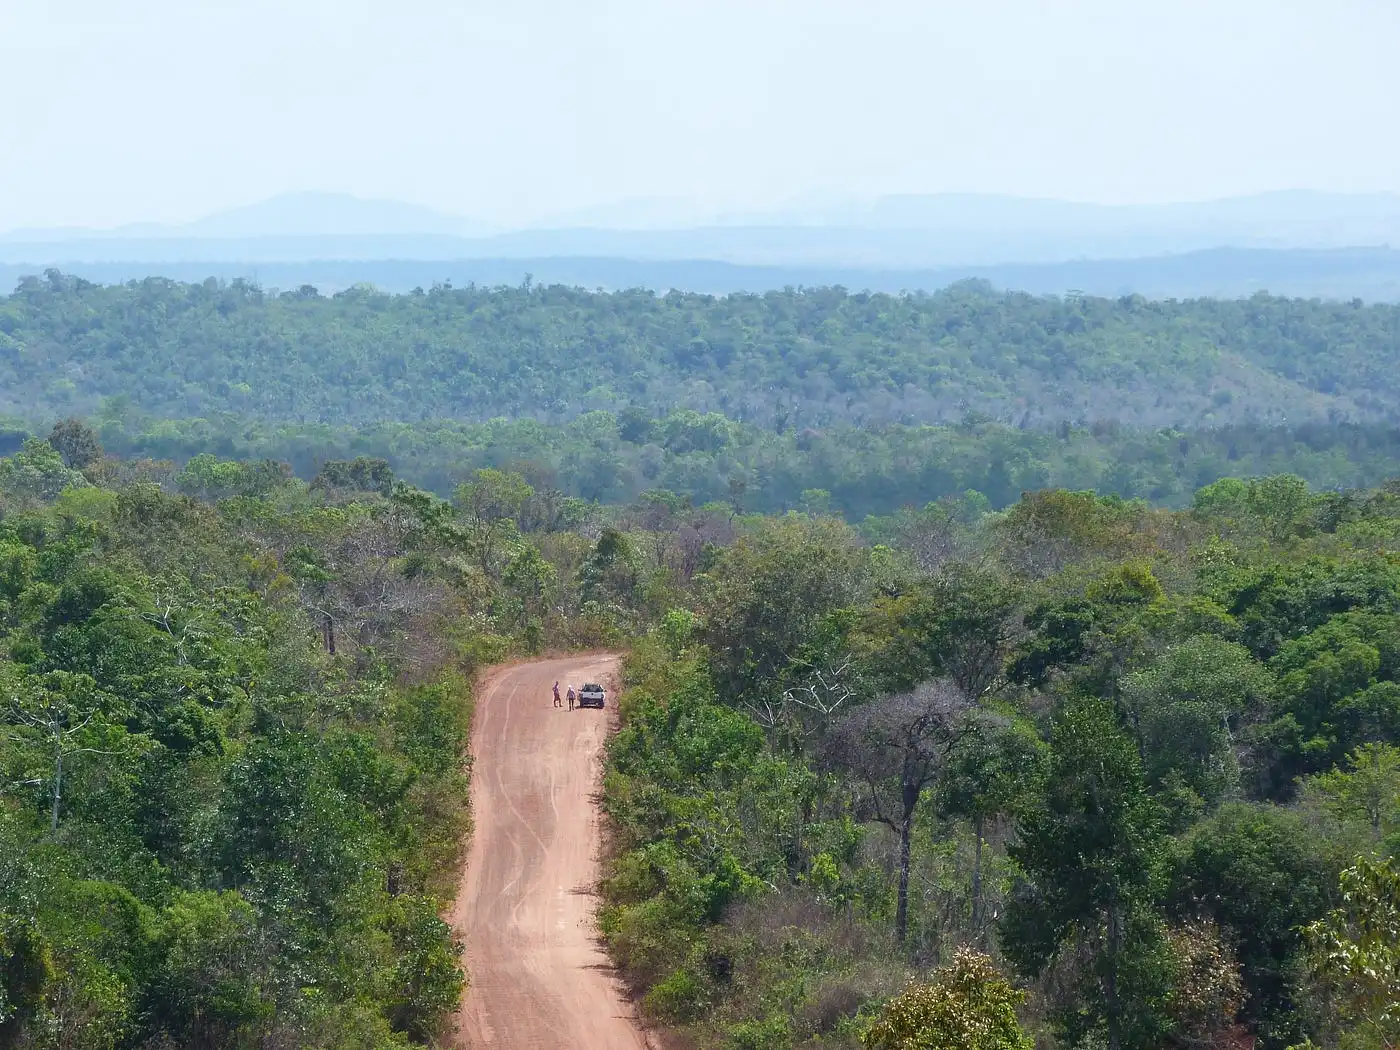 Native Forests in Brazil Shrink 15% Over 38 Years. (Photo Internet reproduction)